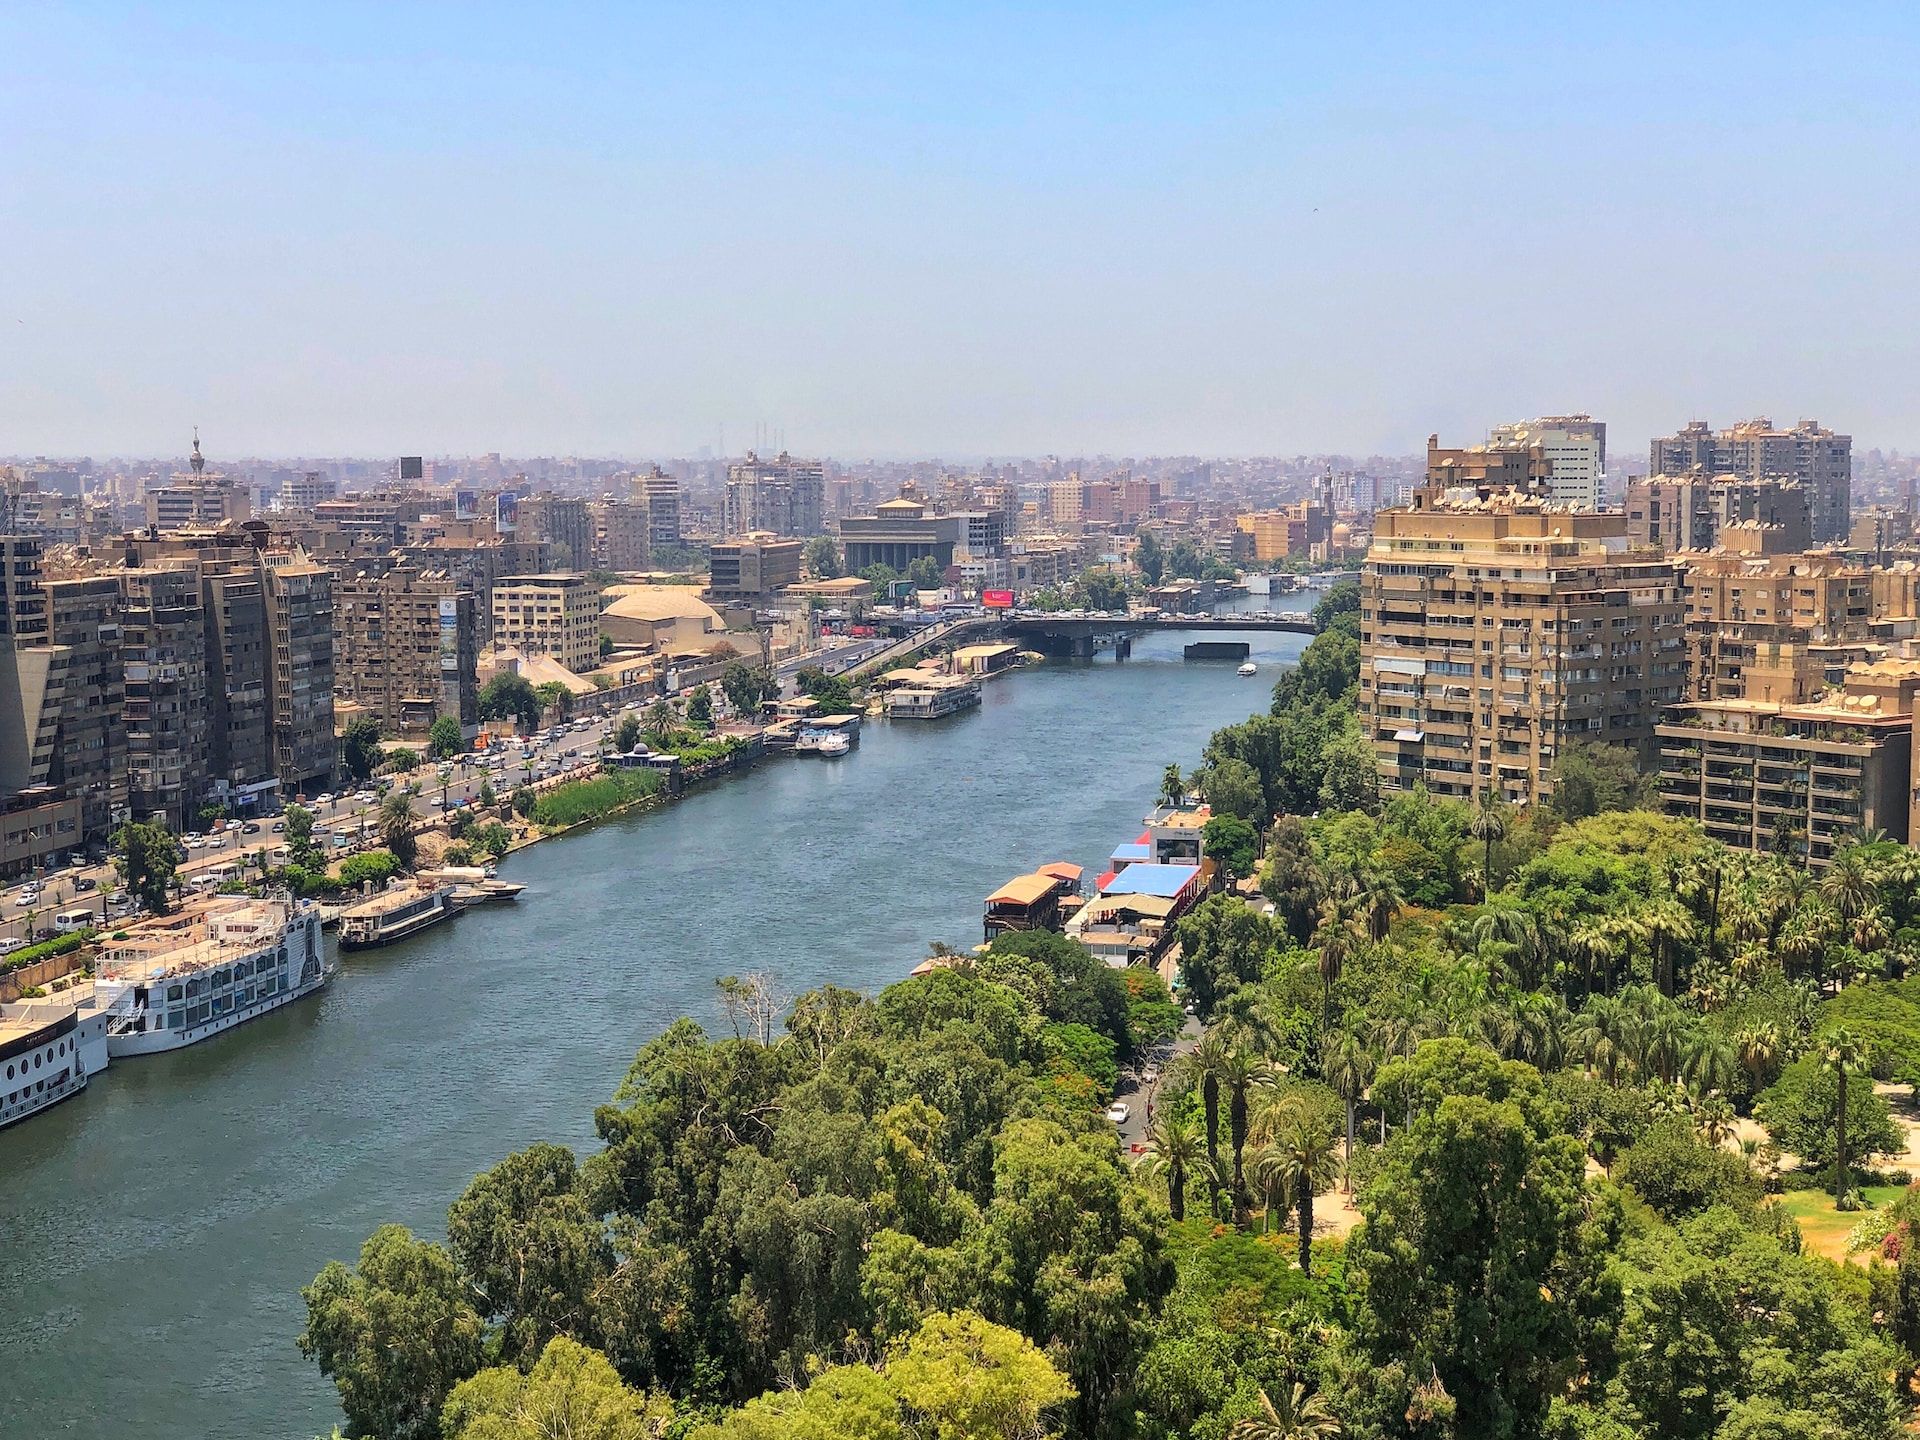 A stunning aerial view of the Nile River with the Zamalek District to the right and the Agouza District to the left.